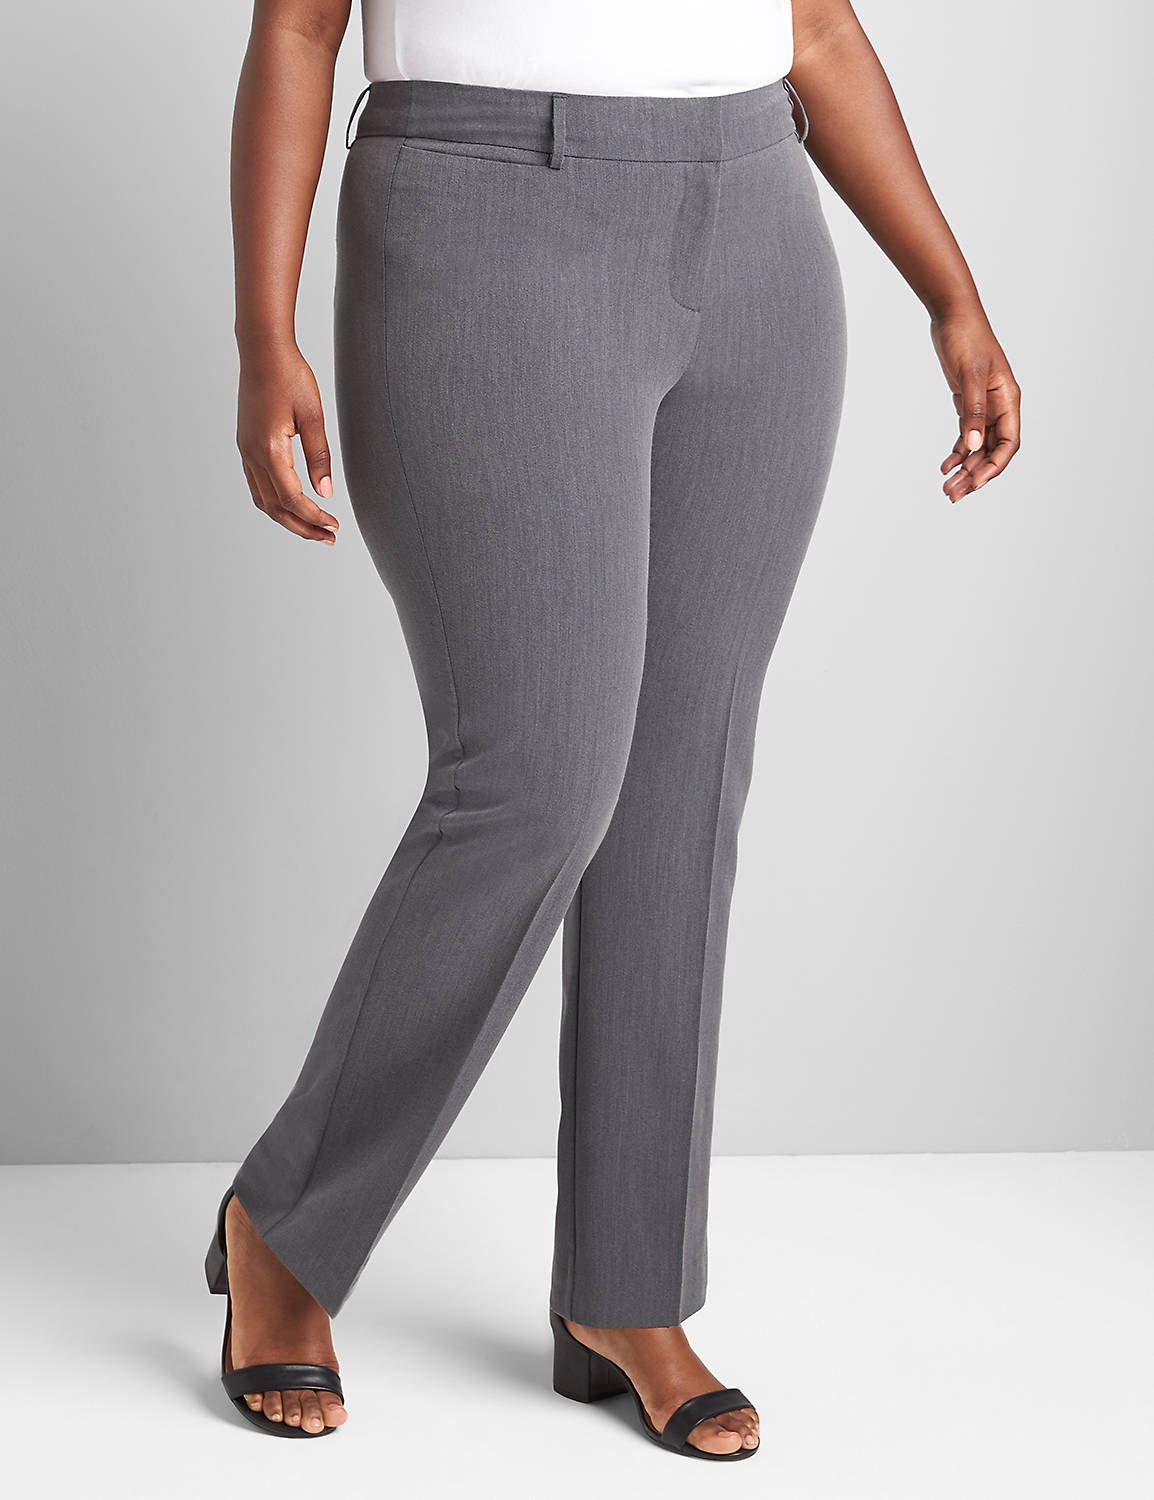 The Perfect Drape Straight Fit Straight with Magic Waistband - Deluxe 1122733:B65 Dark Heather Grey:12 Product Image 1